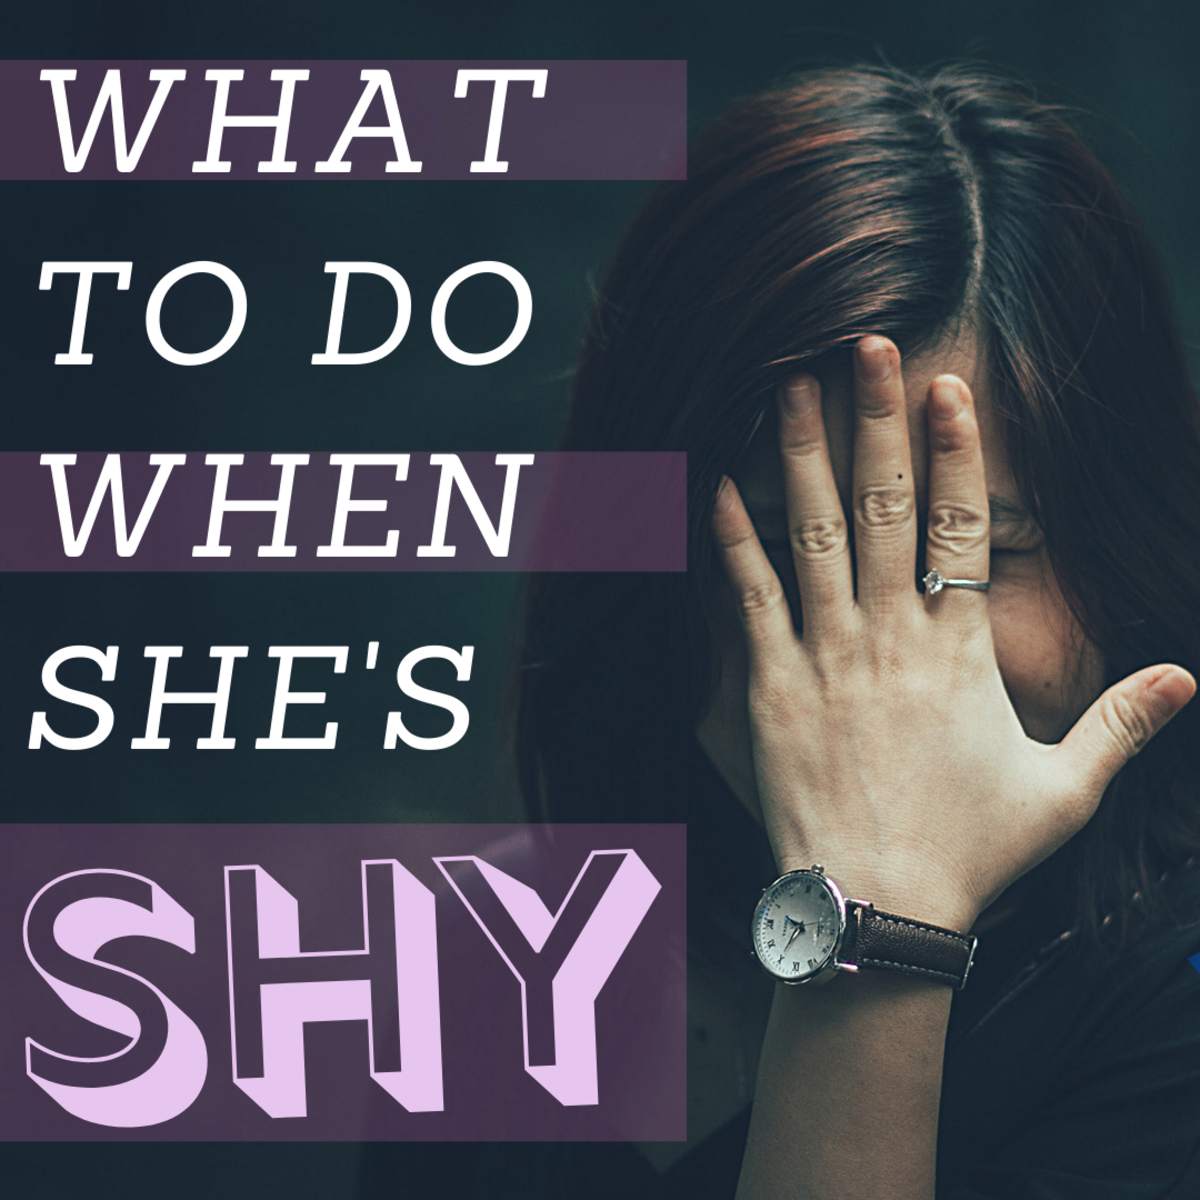 How To Deal With A Shy Girl Temporaryatmosphere